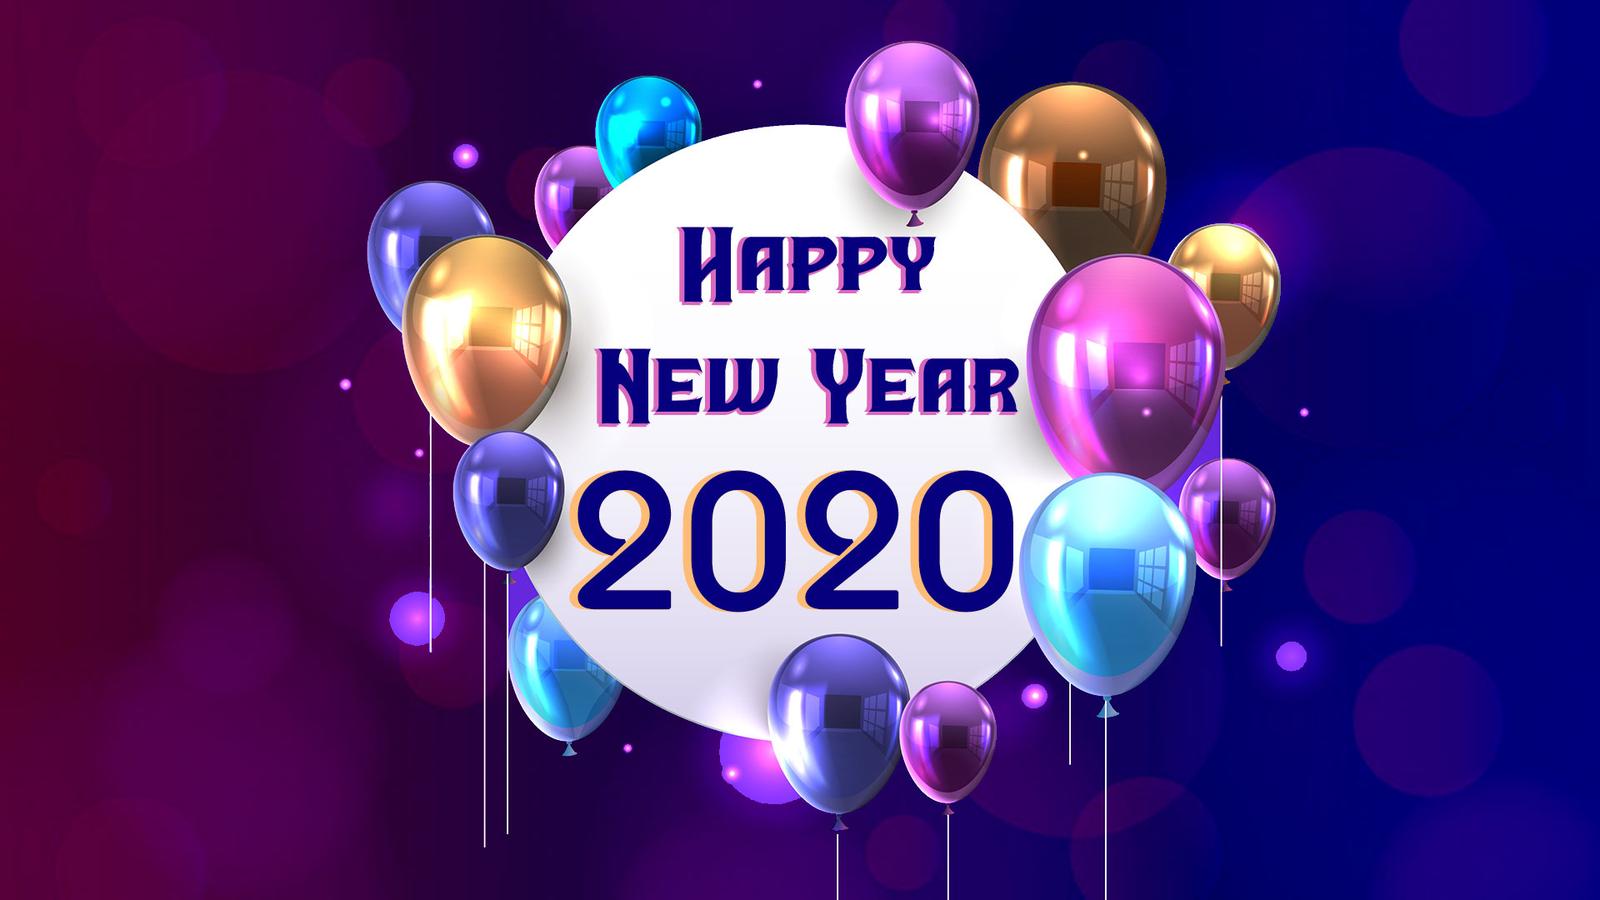 Balloons for a new decade - Happy New Year 2020